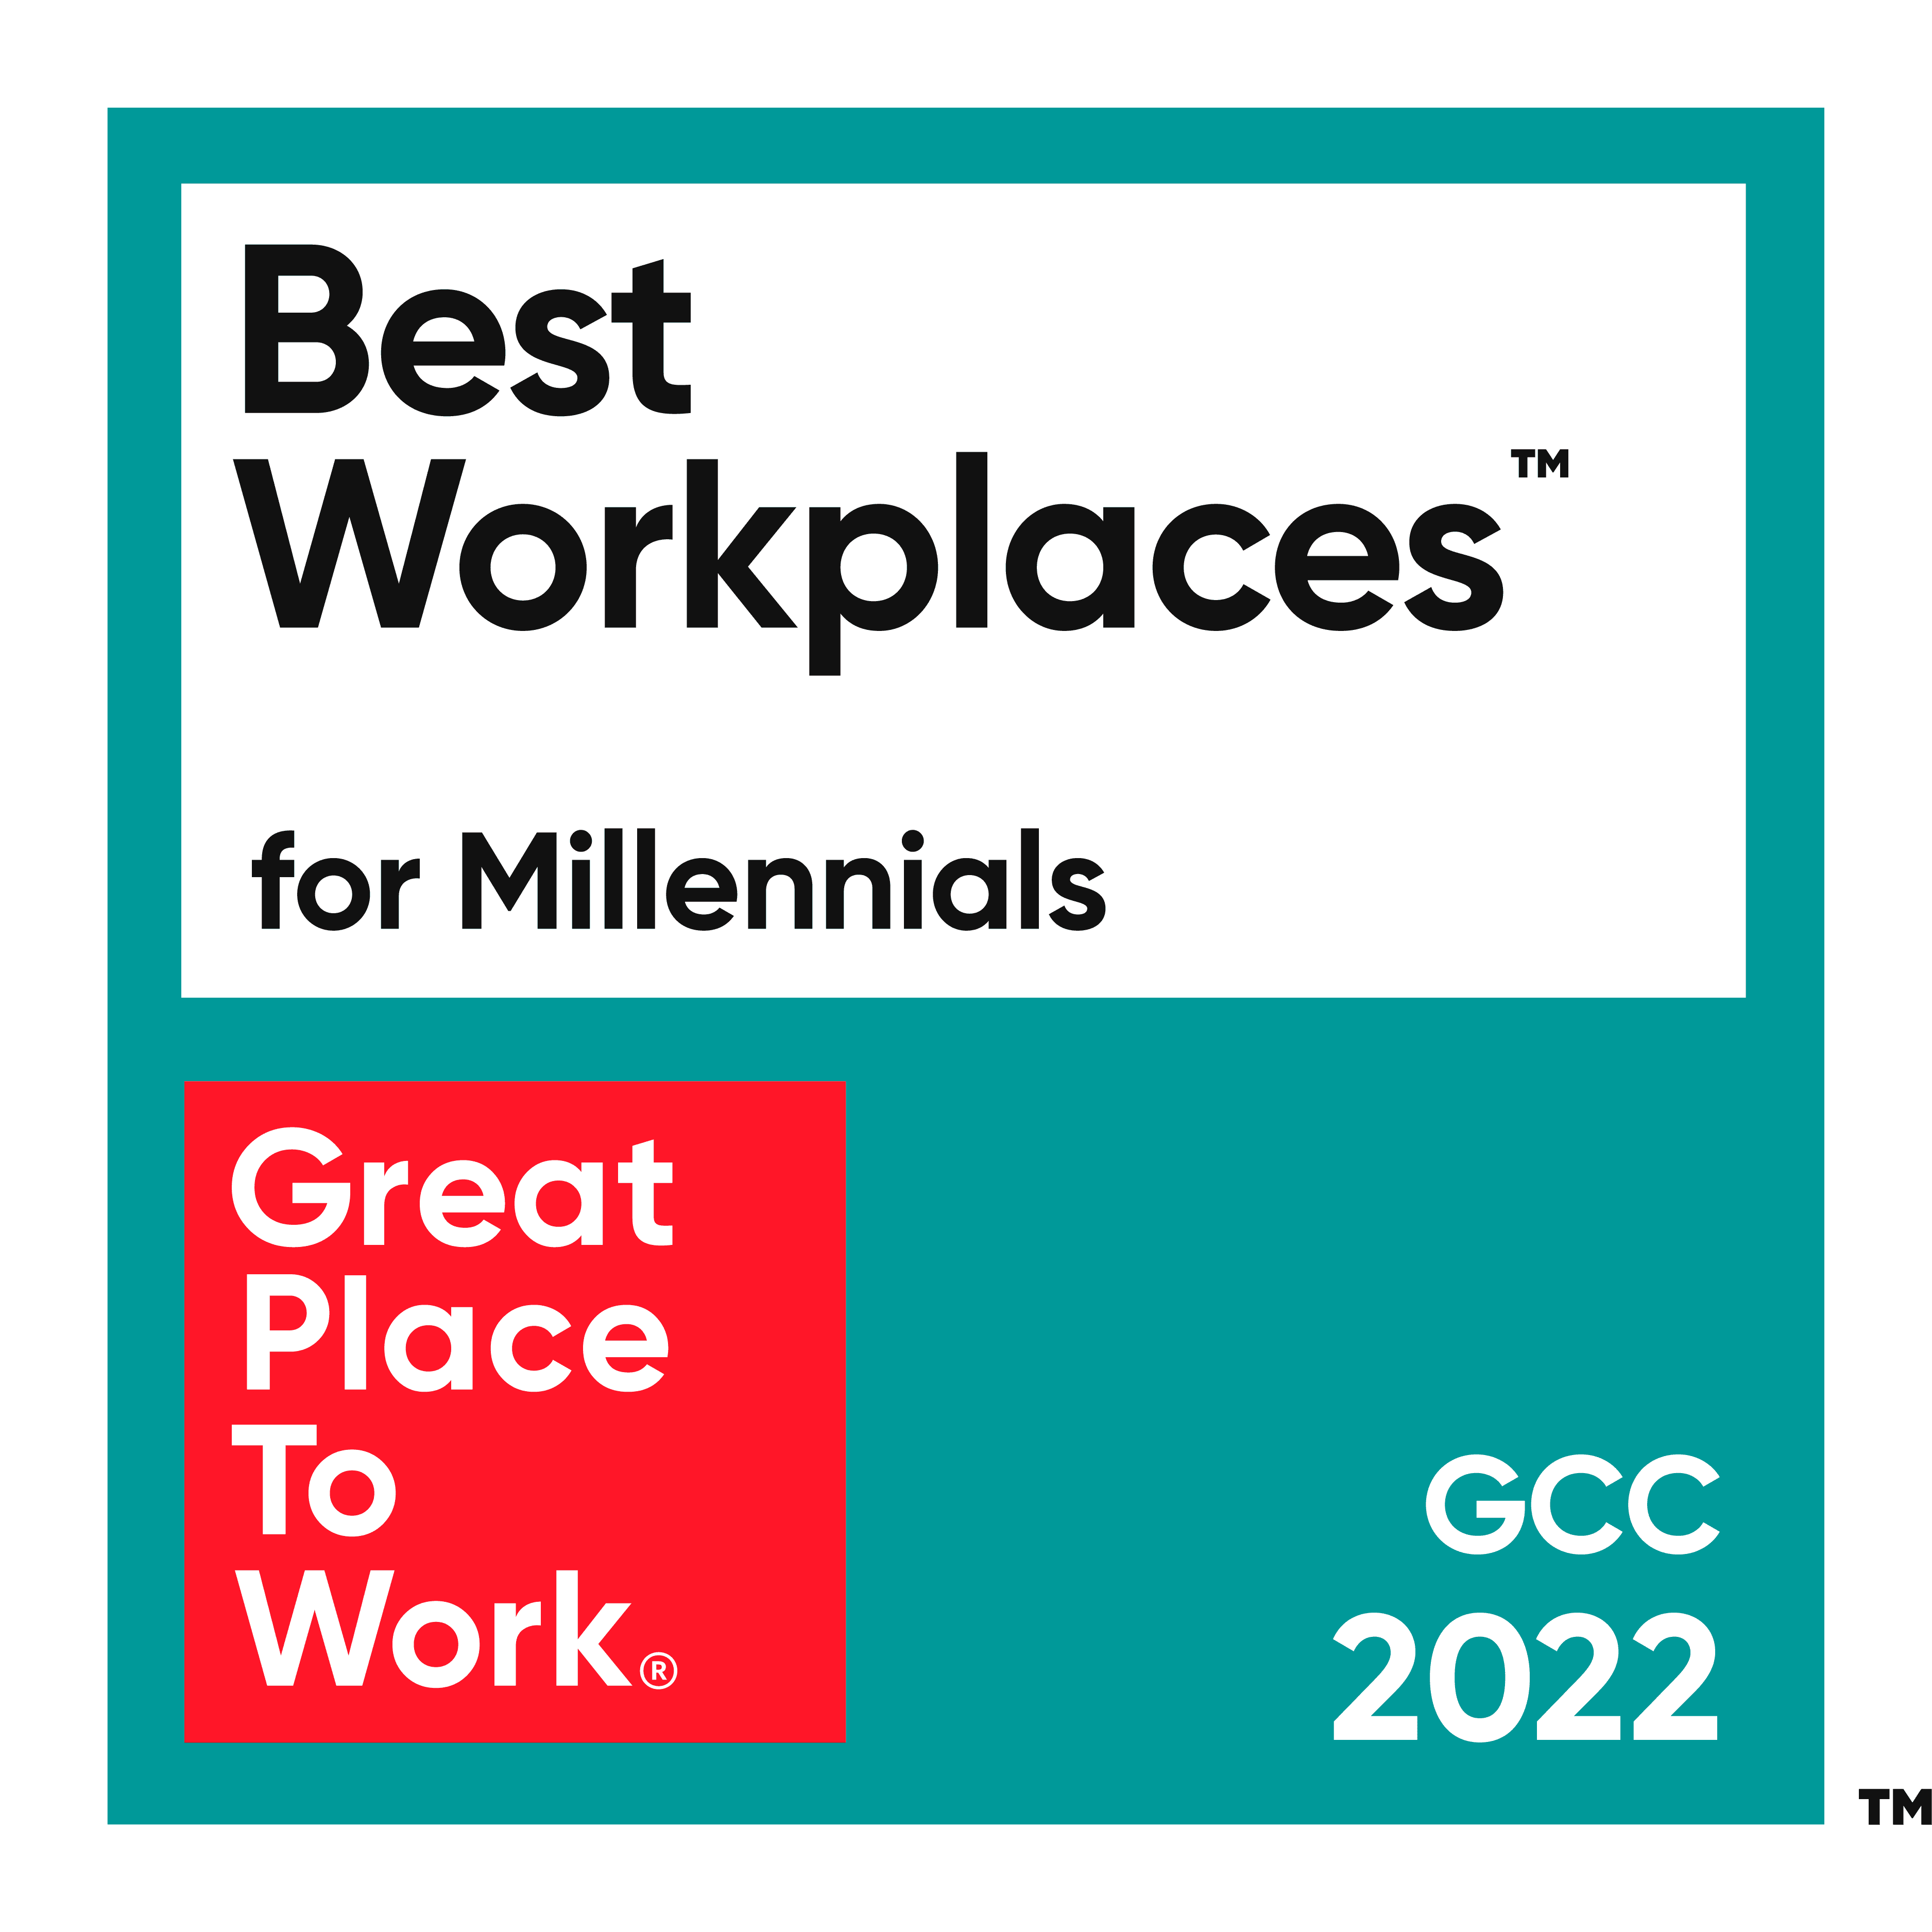 Best Workplaces for Millennials™ 2022 - Great Place to Work